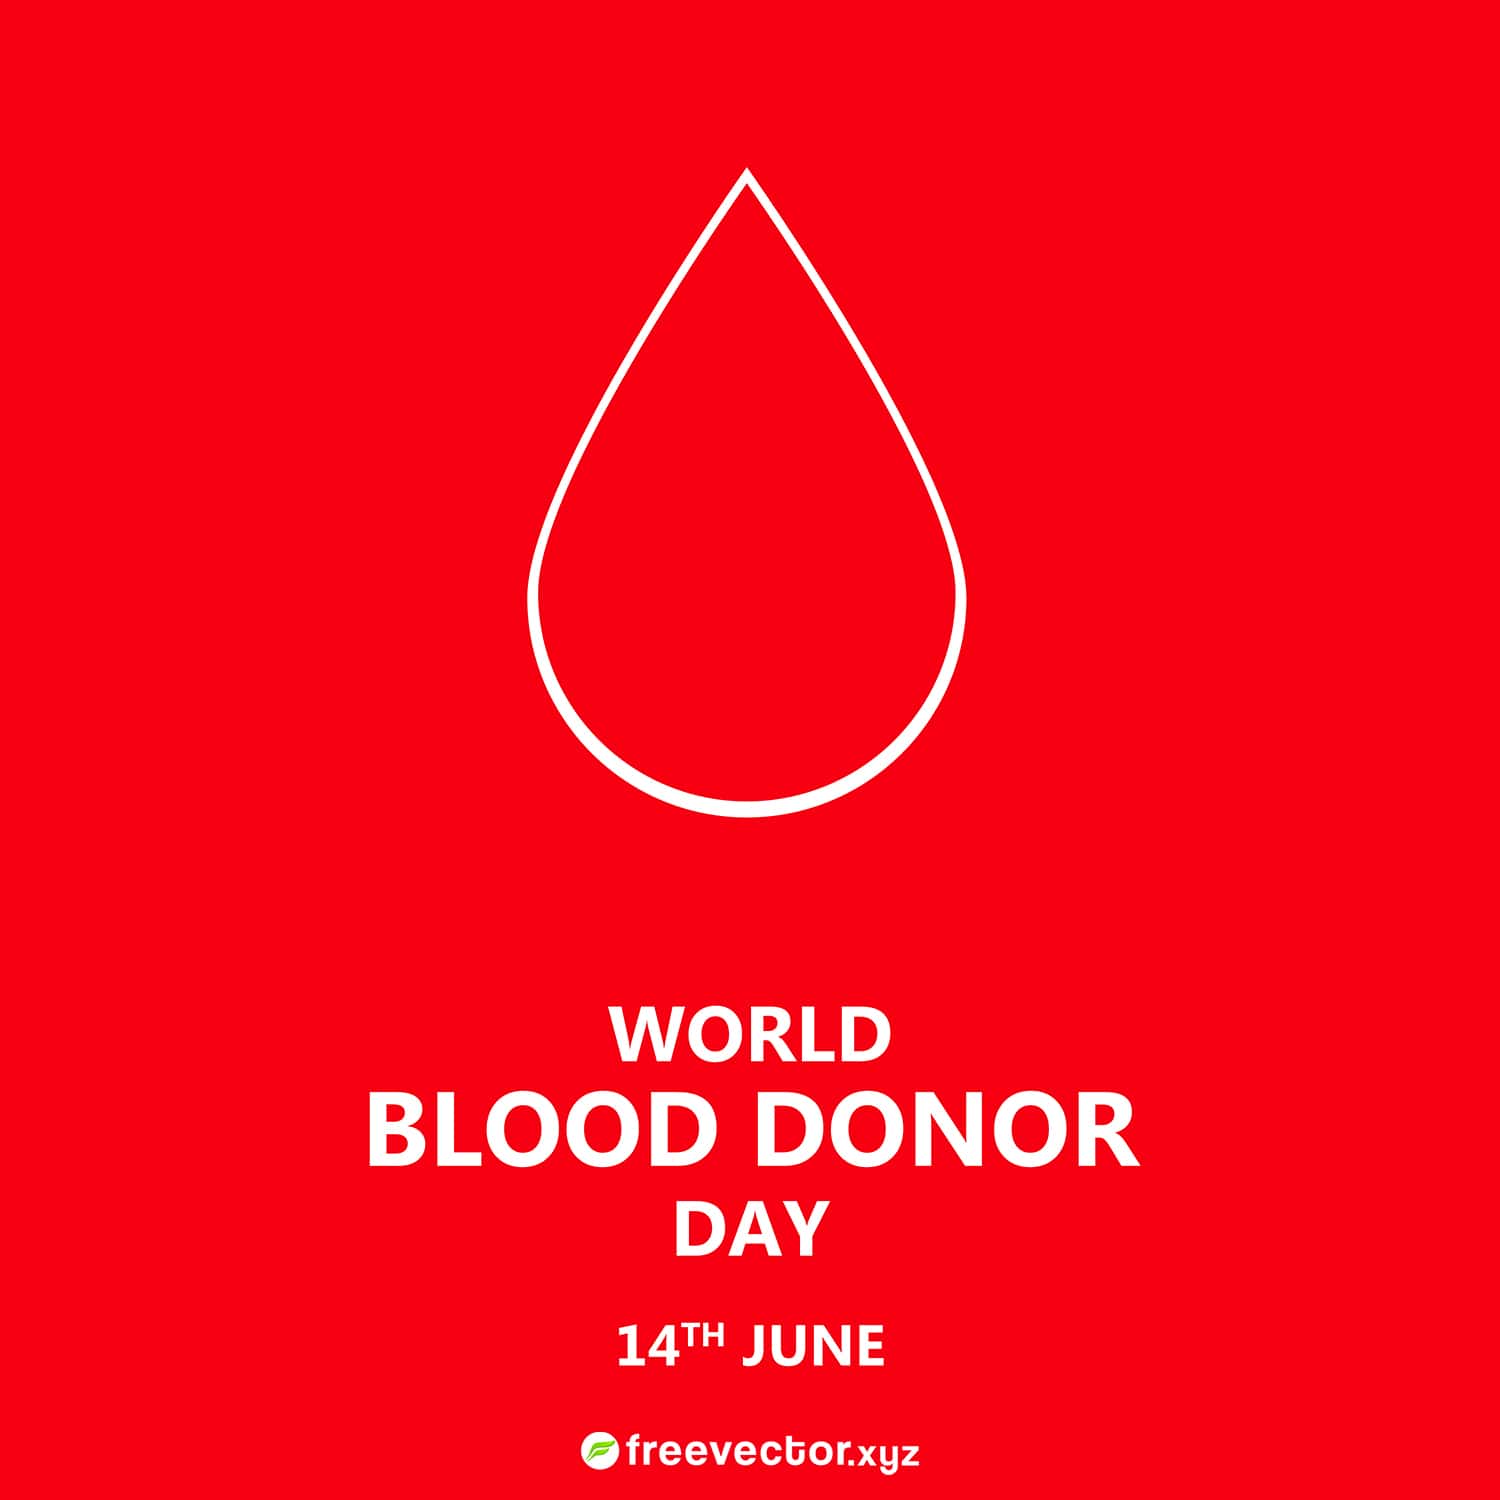 World blood donor day free vector illustration